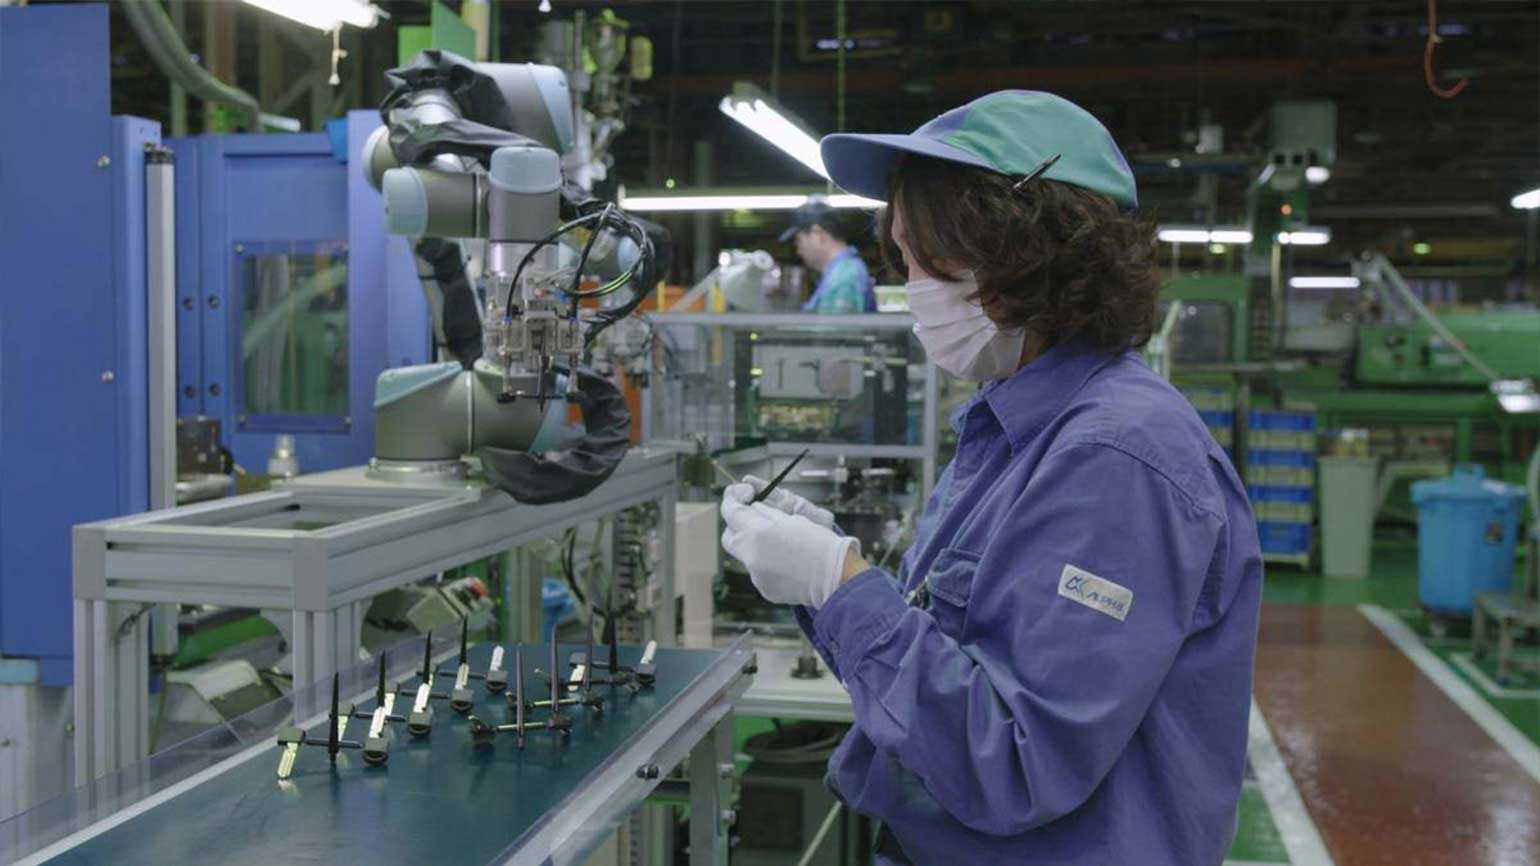 Installing the UR cobots at Alpha Corporation in Japan improved productivity dramatically, resulting in a 20% increase in production output in the molding process of automobile keys.